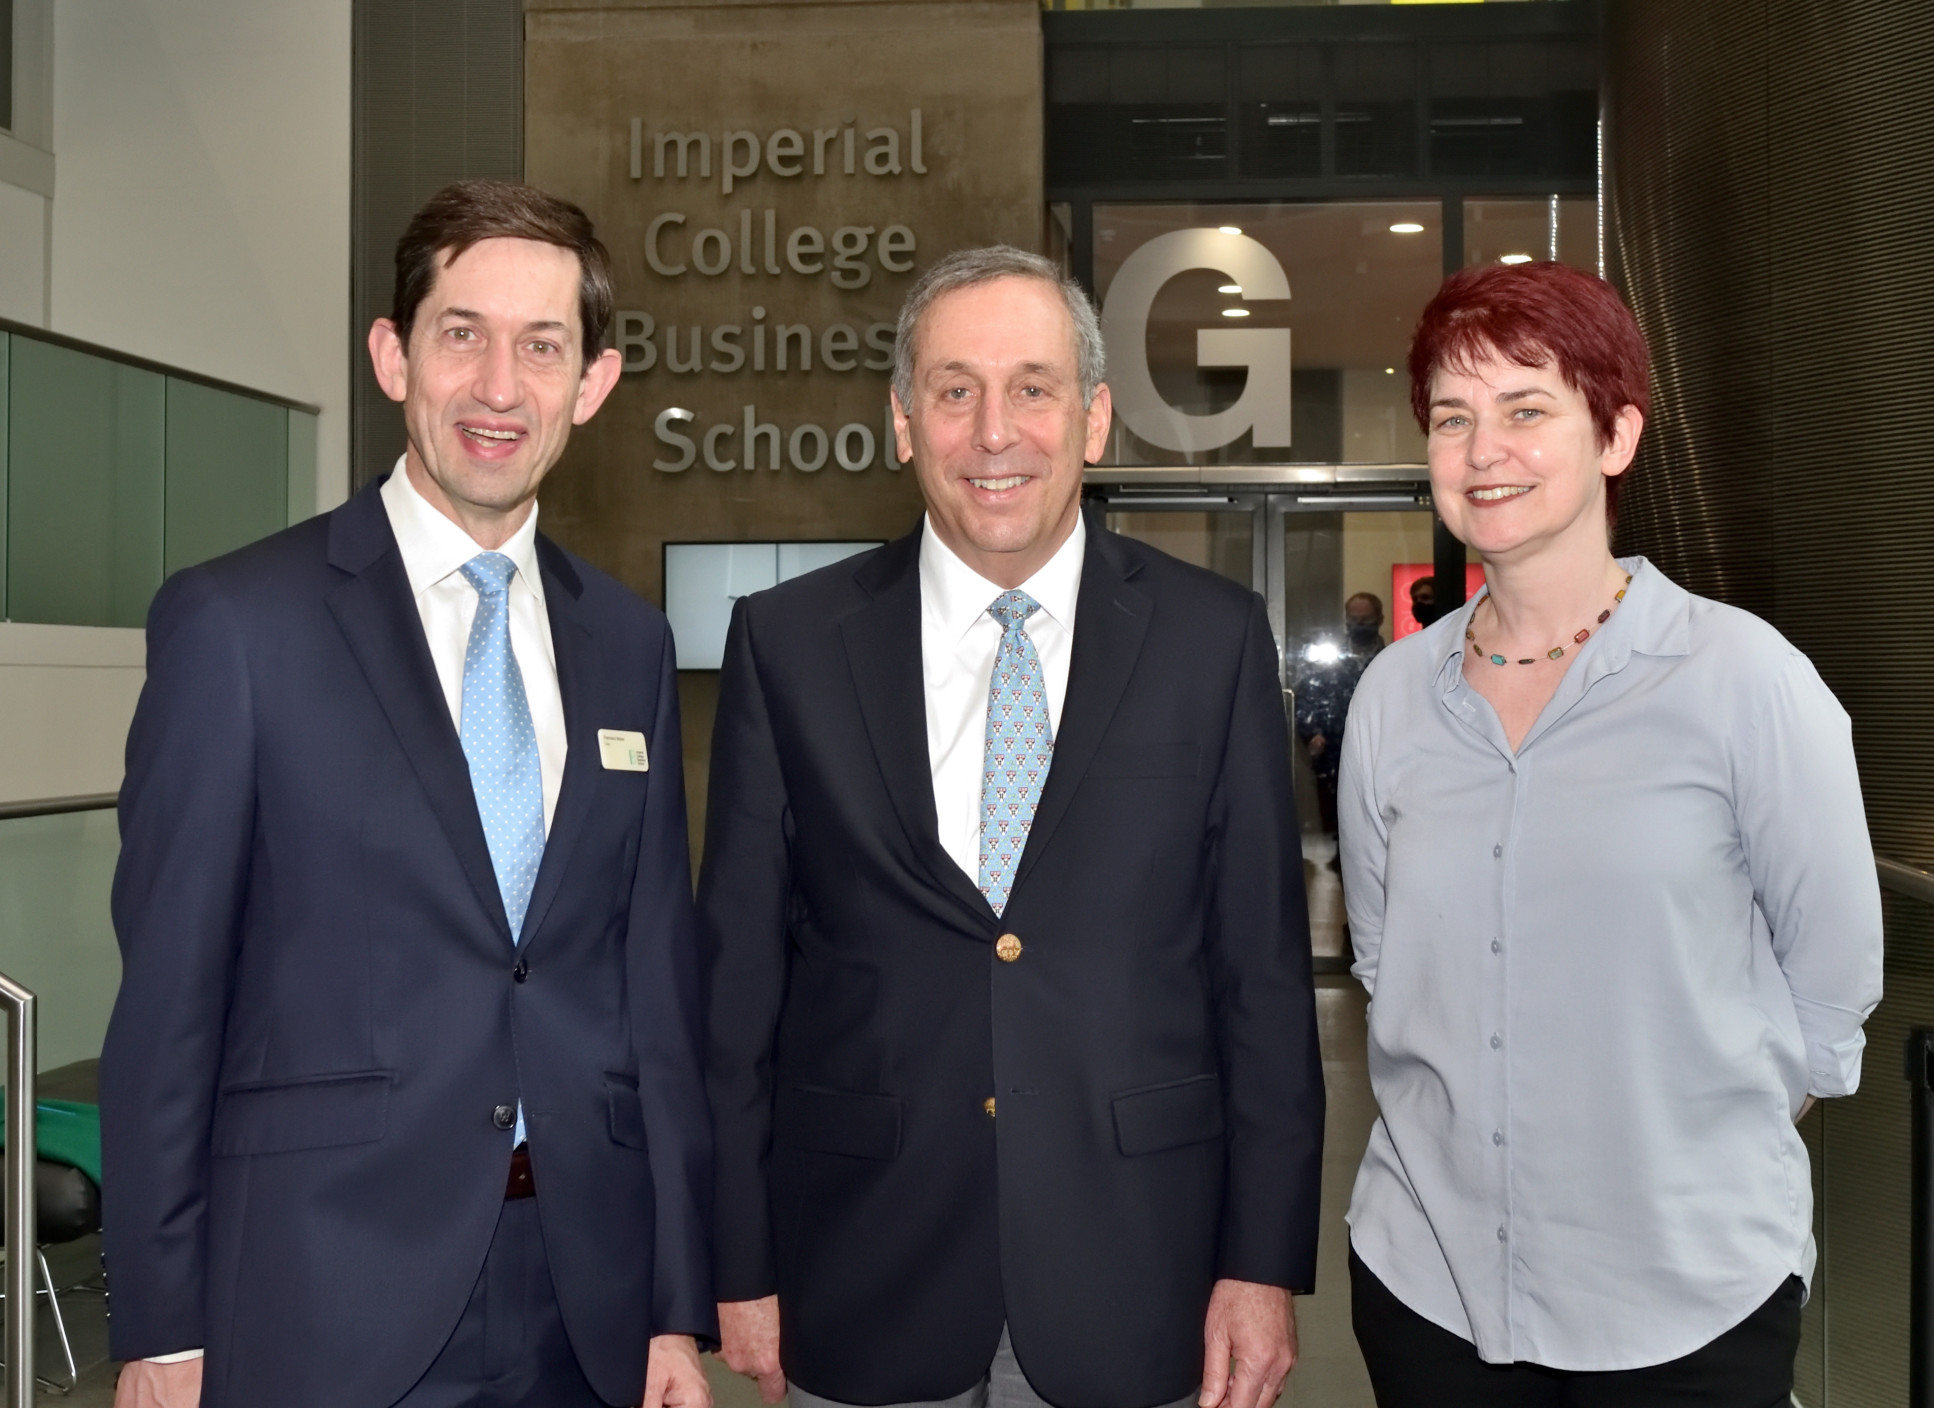 Harvard president with imperial academics